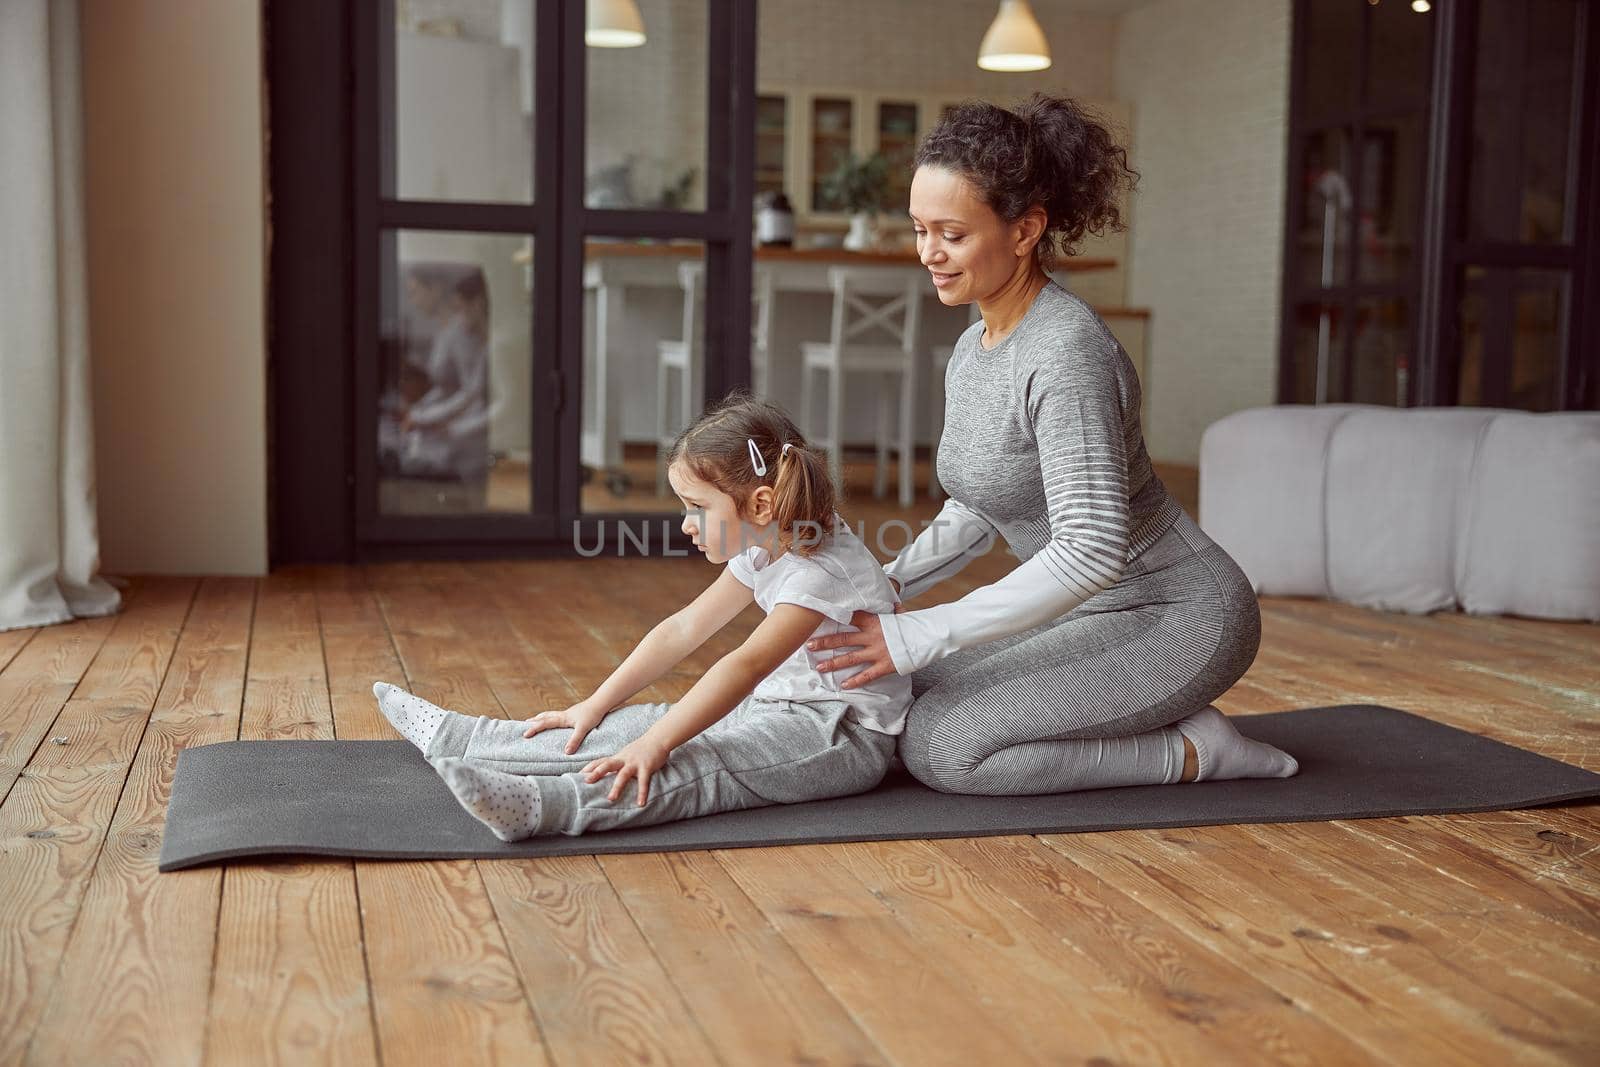 Smiling woman helping daughter with gymnastics at home by Yaroslav_astakhov